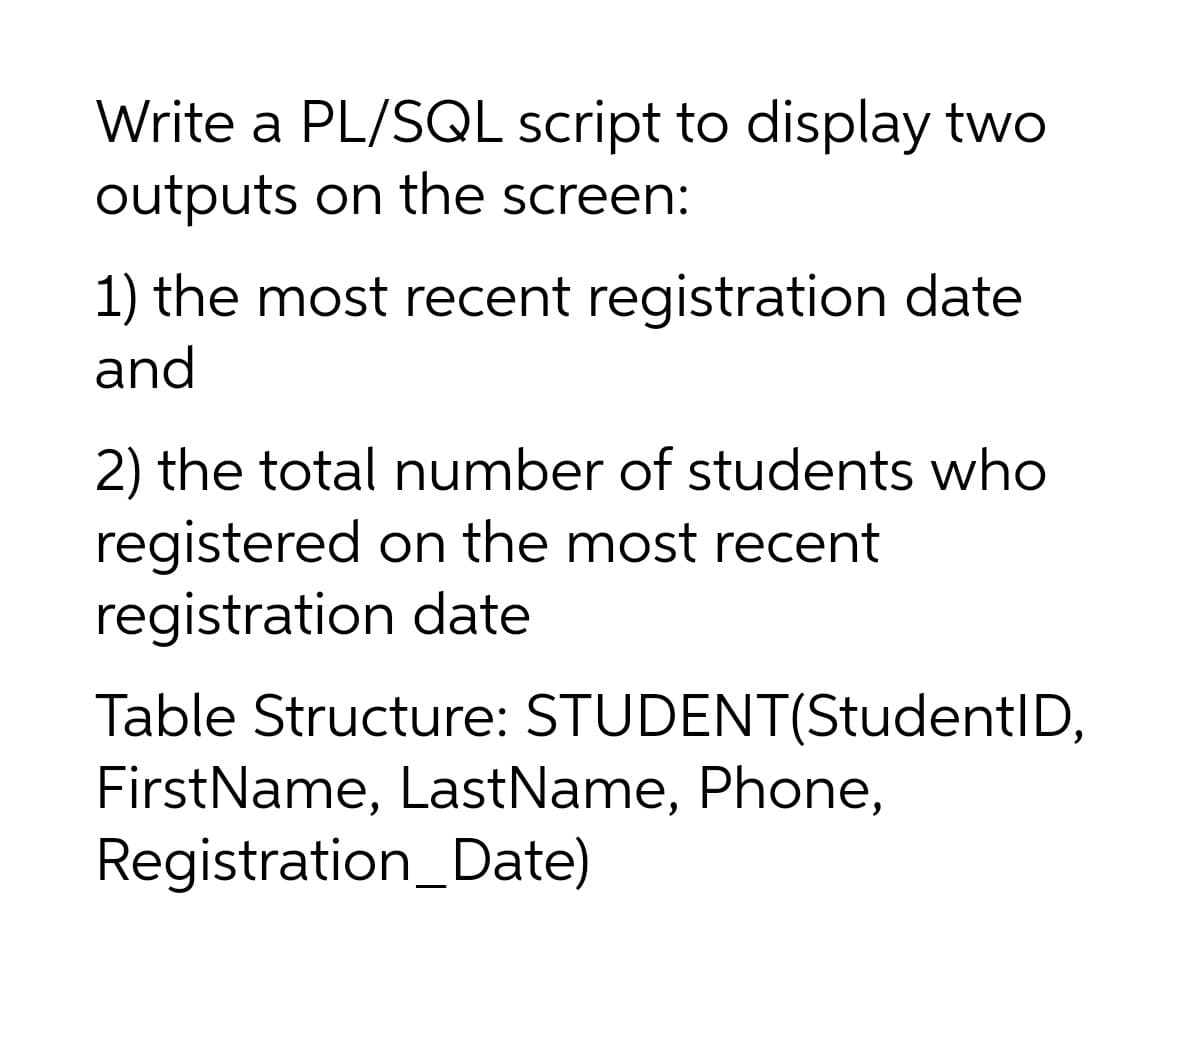 Write a PL/SQL script to display two
outputs on the screen:
1) the most recent registration date
and
2) the total number of students who
registered on the most recent
registration date
Table Structure: STUDENT(StudentID,
FirstName, LastName, Phone,
Registration_Date)
